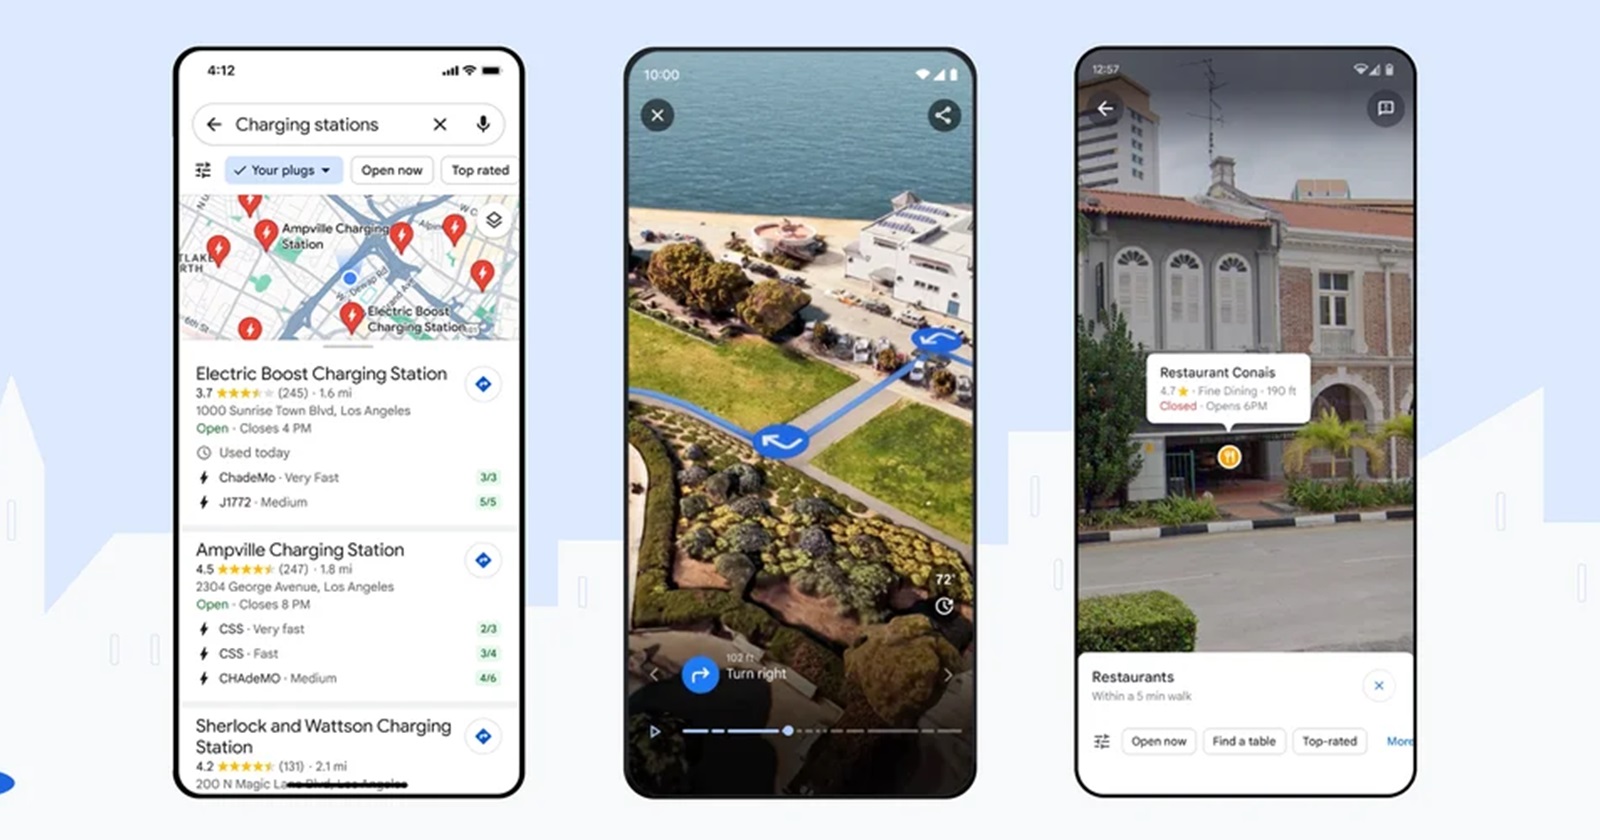 Google Maps' new colors: A crux of expert and user feedback so far